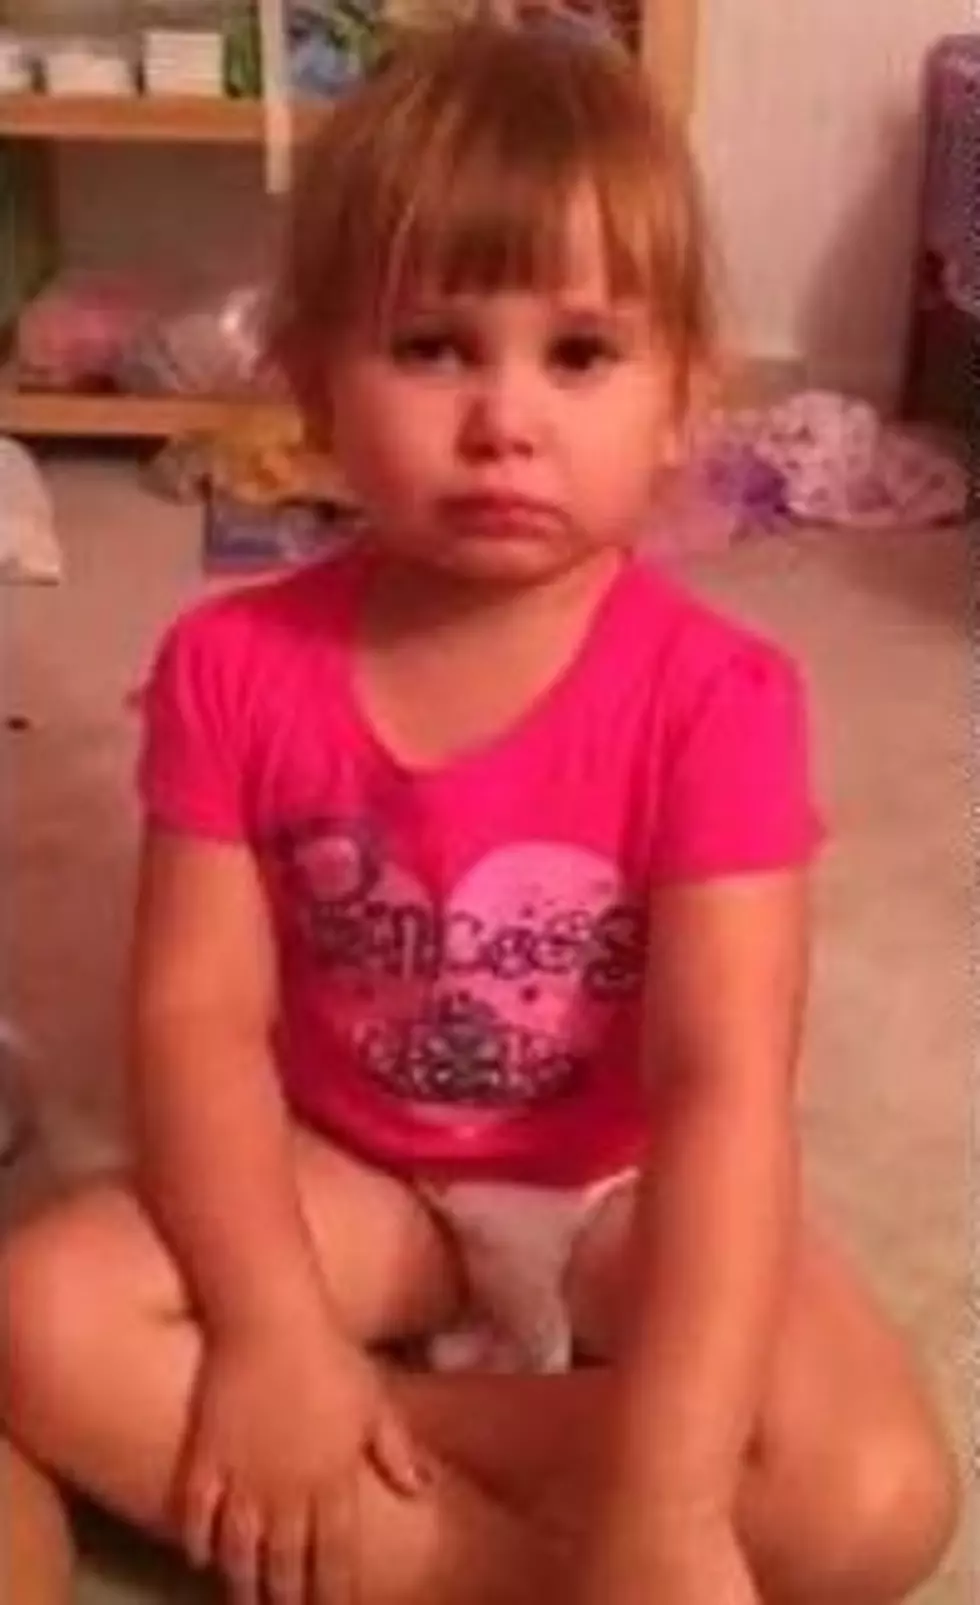 This Adorable Little Girl is Convinced Her Doll Made Her Do It [VIDEO]